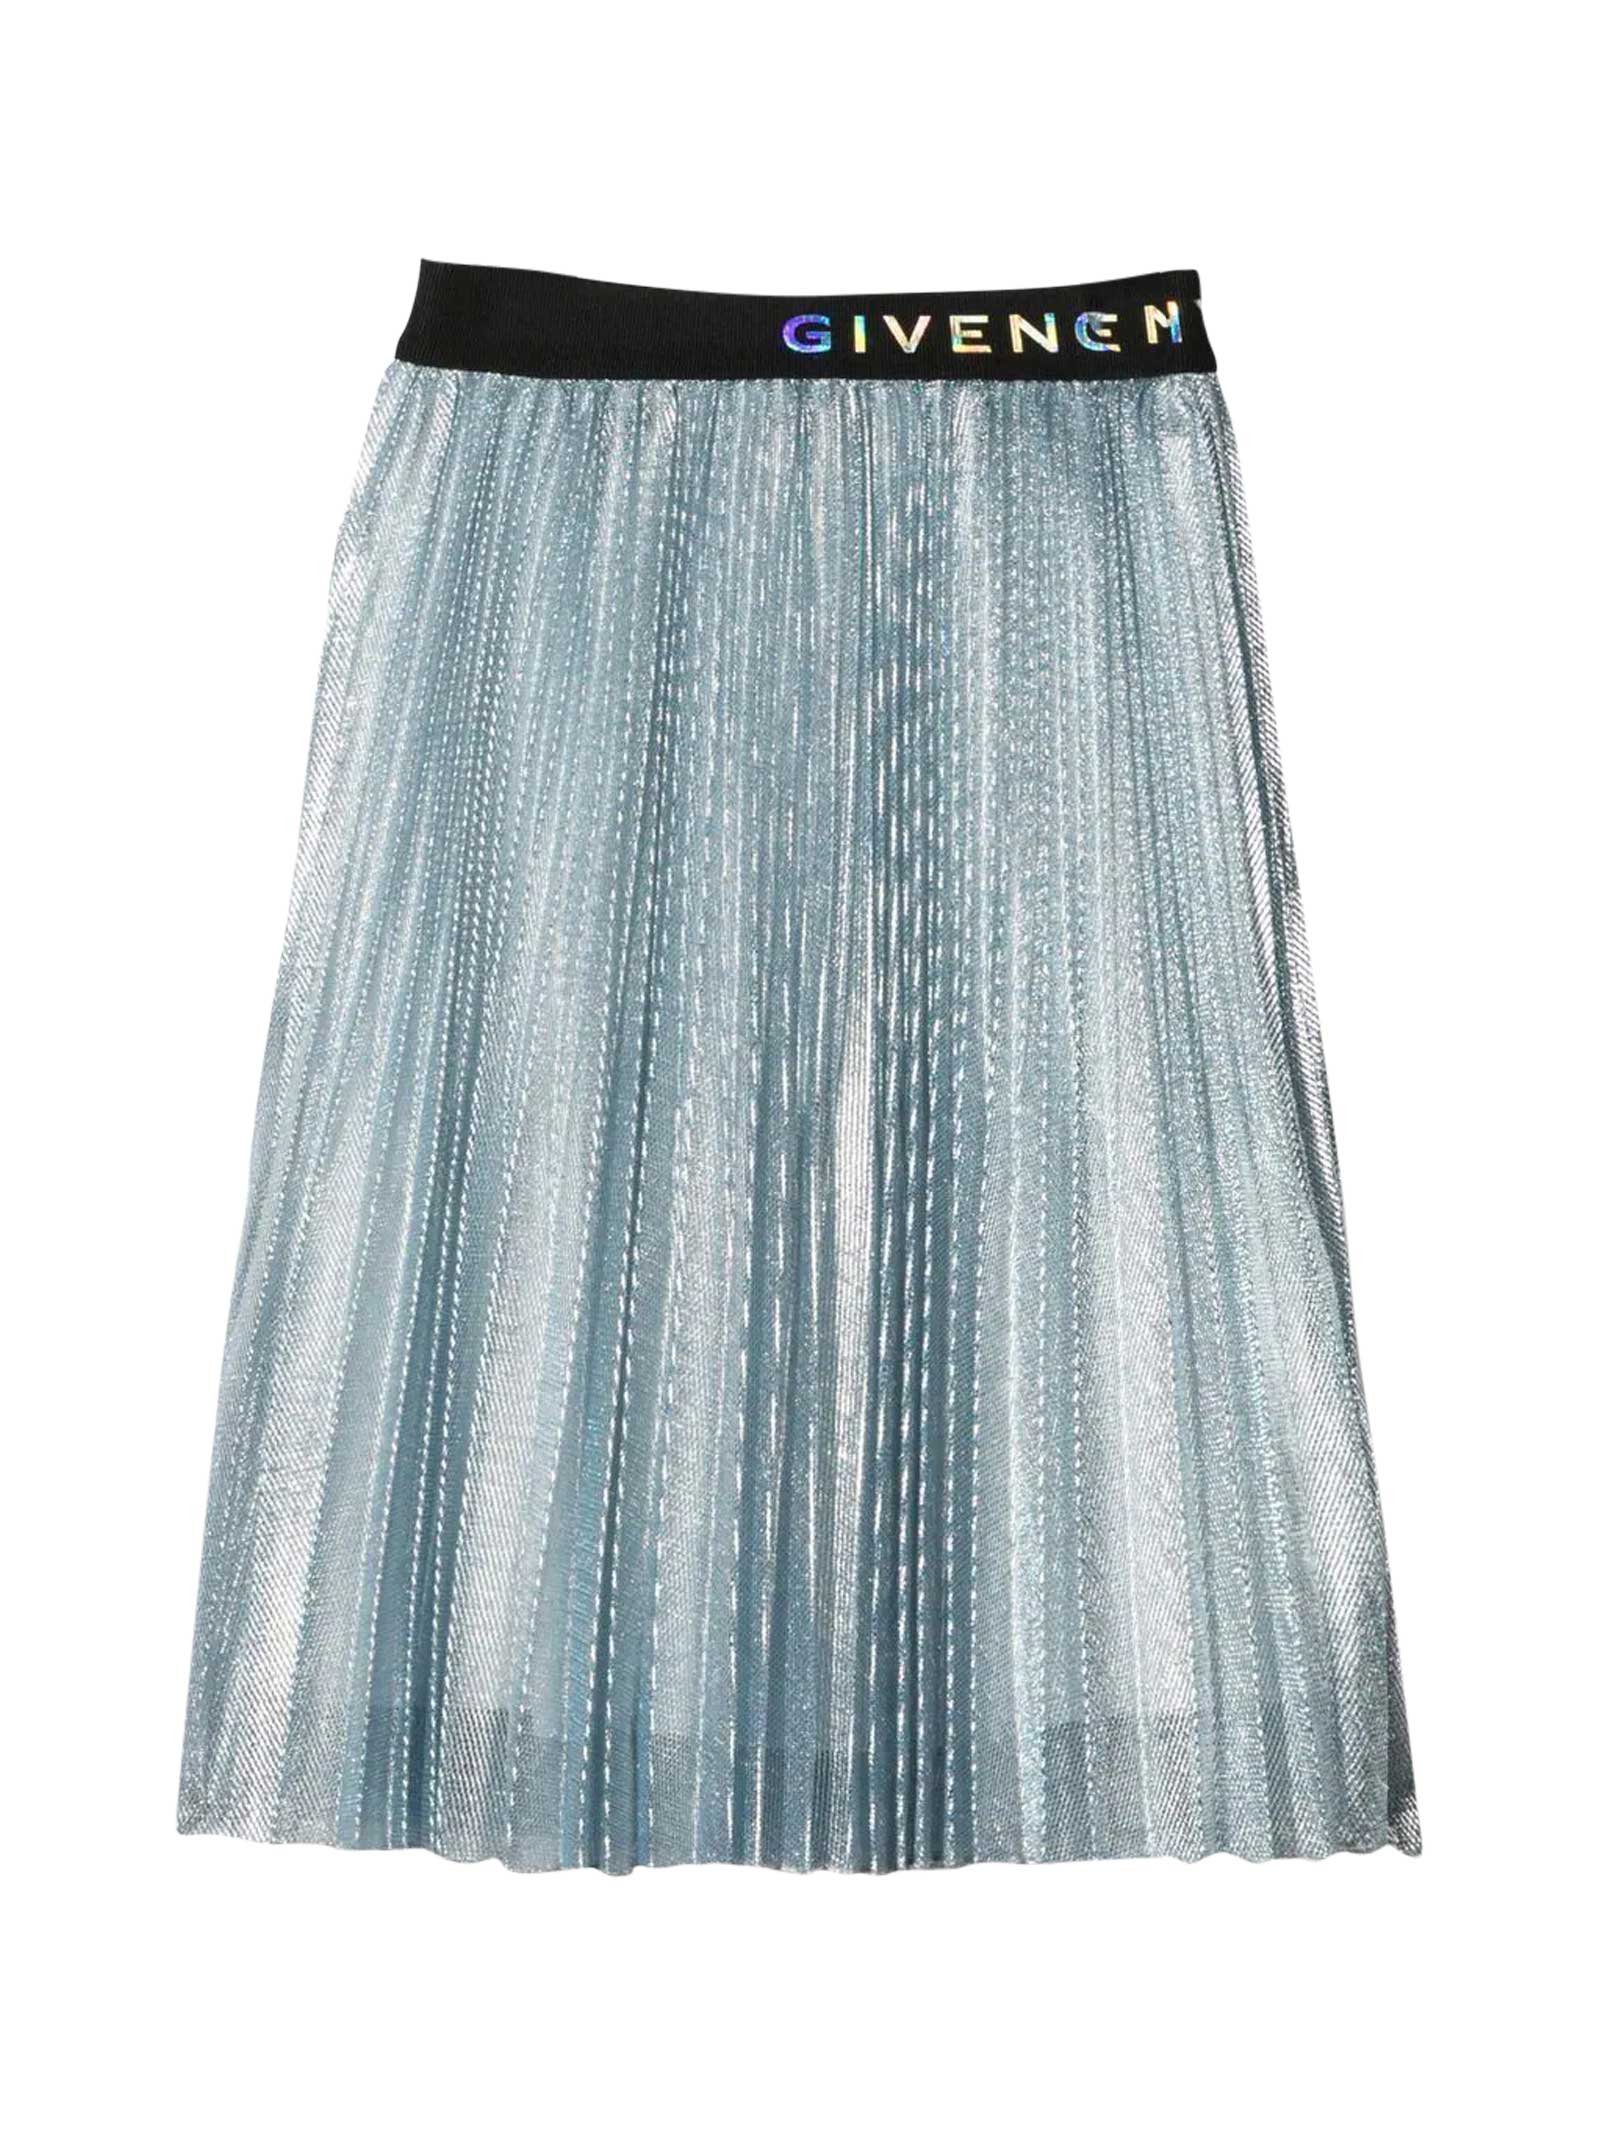 GIVENCHY PLEATED BLUE SKIRT,H13045 Z40